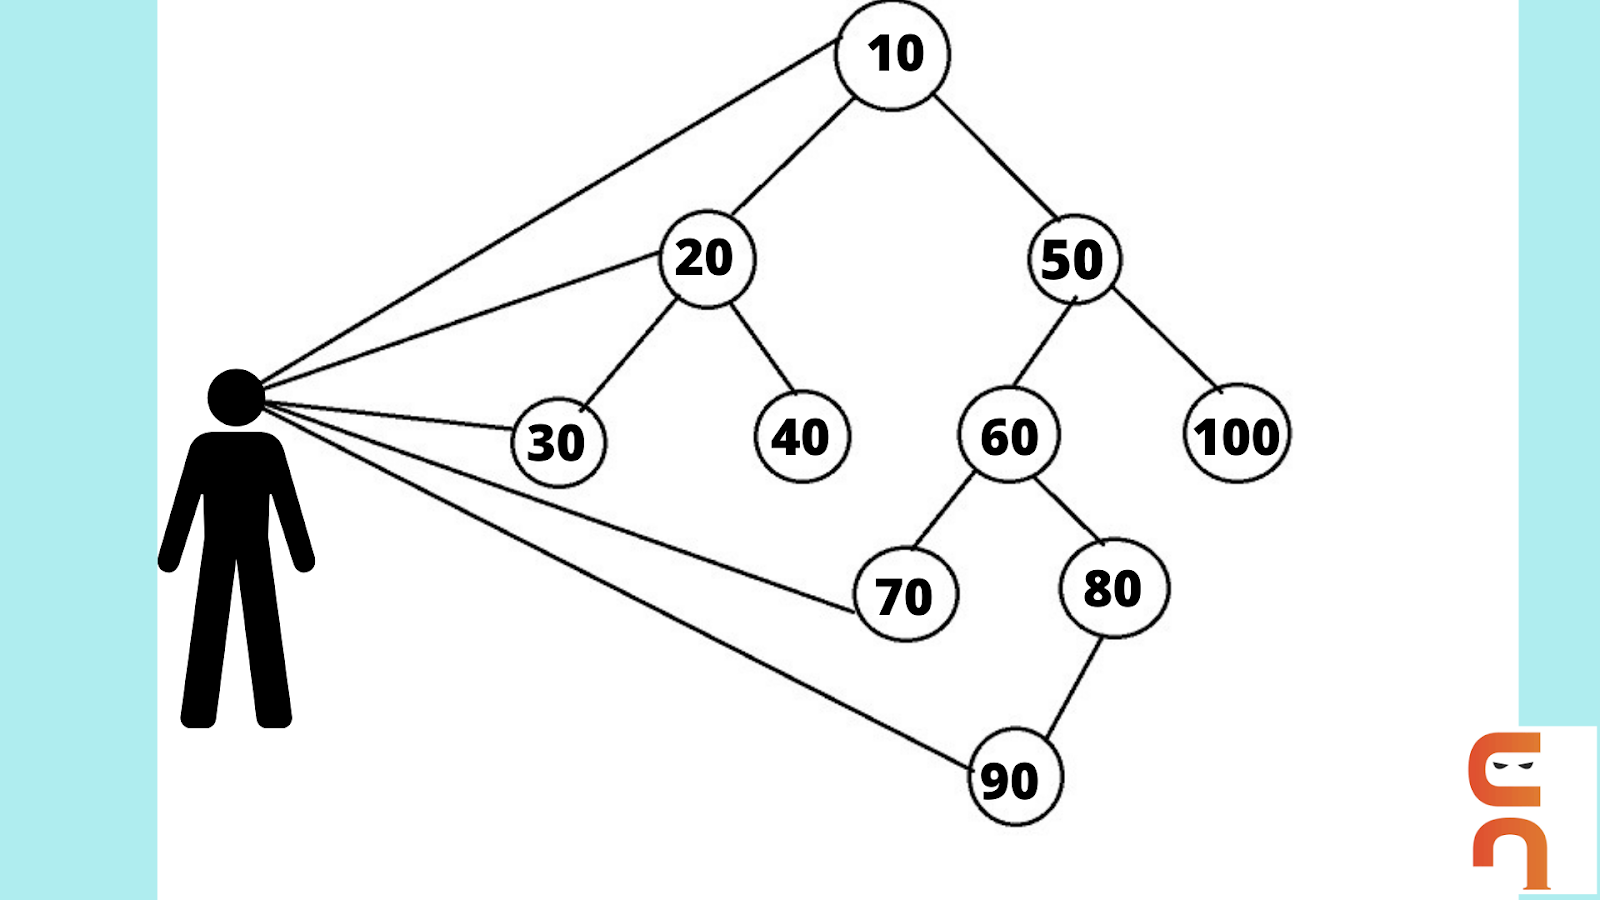 RIght View of Binary Tree